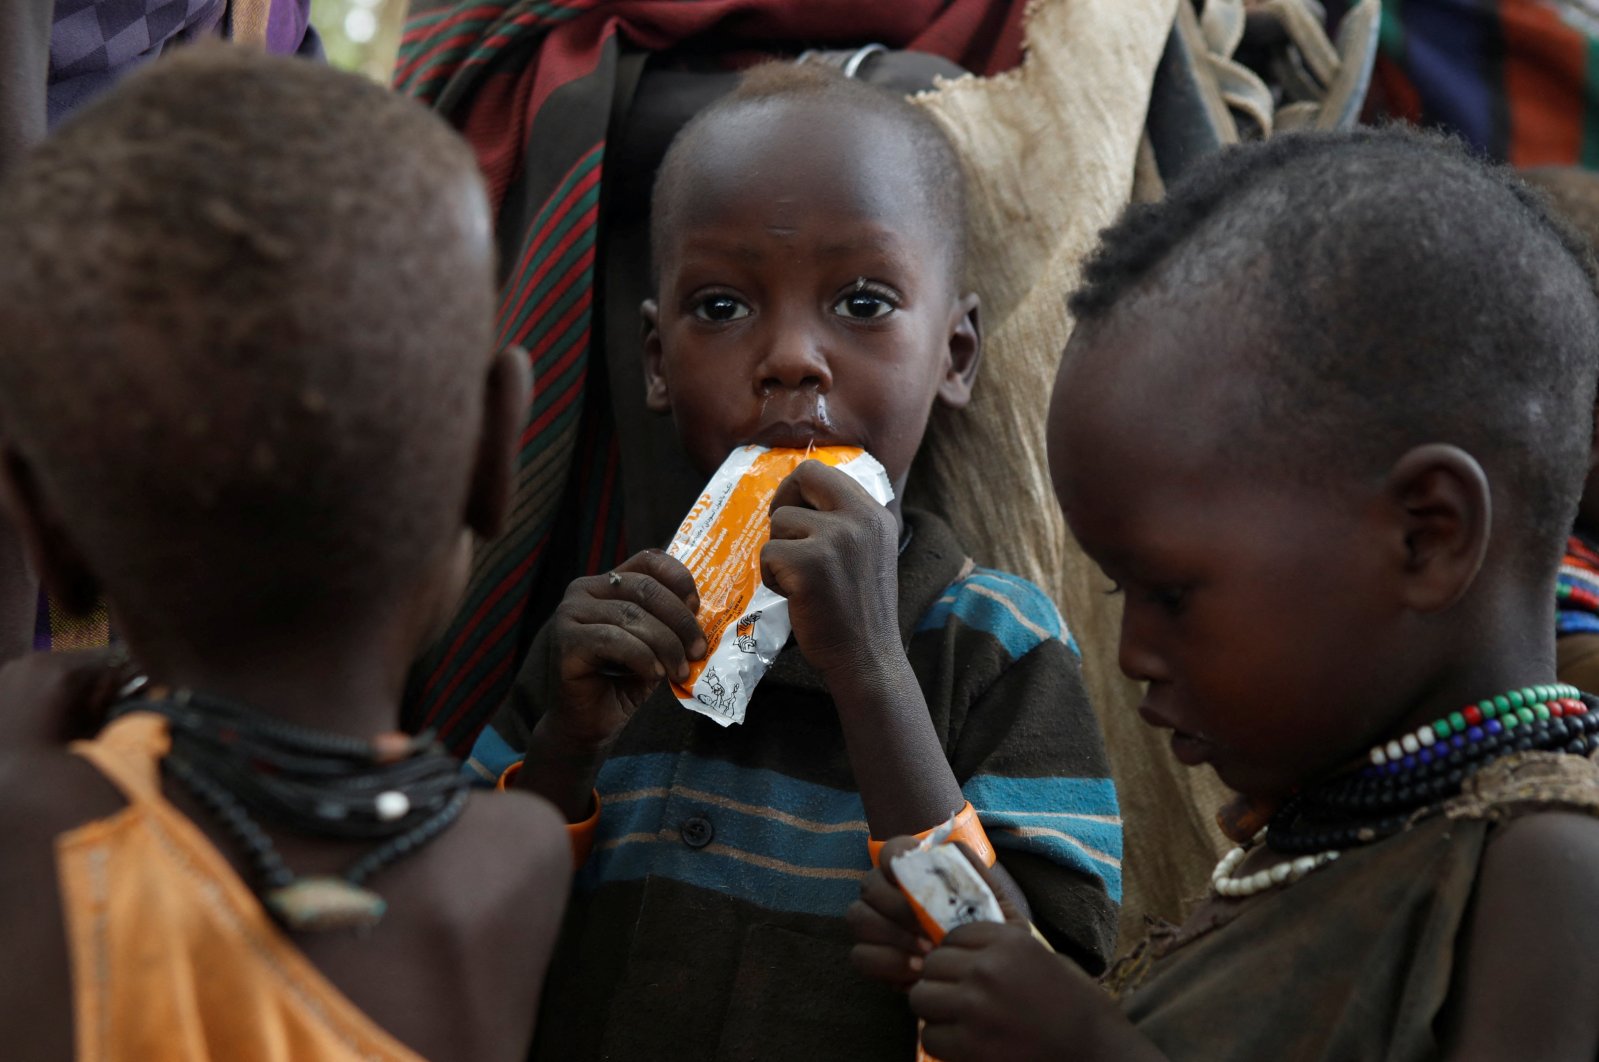 Turkana children eat food supplements given by Save the Children organisation during an outreach program in the drought hit Lorengo village, Turkana, Kenya, July 19 2022. (Reuters Photo)